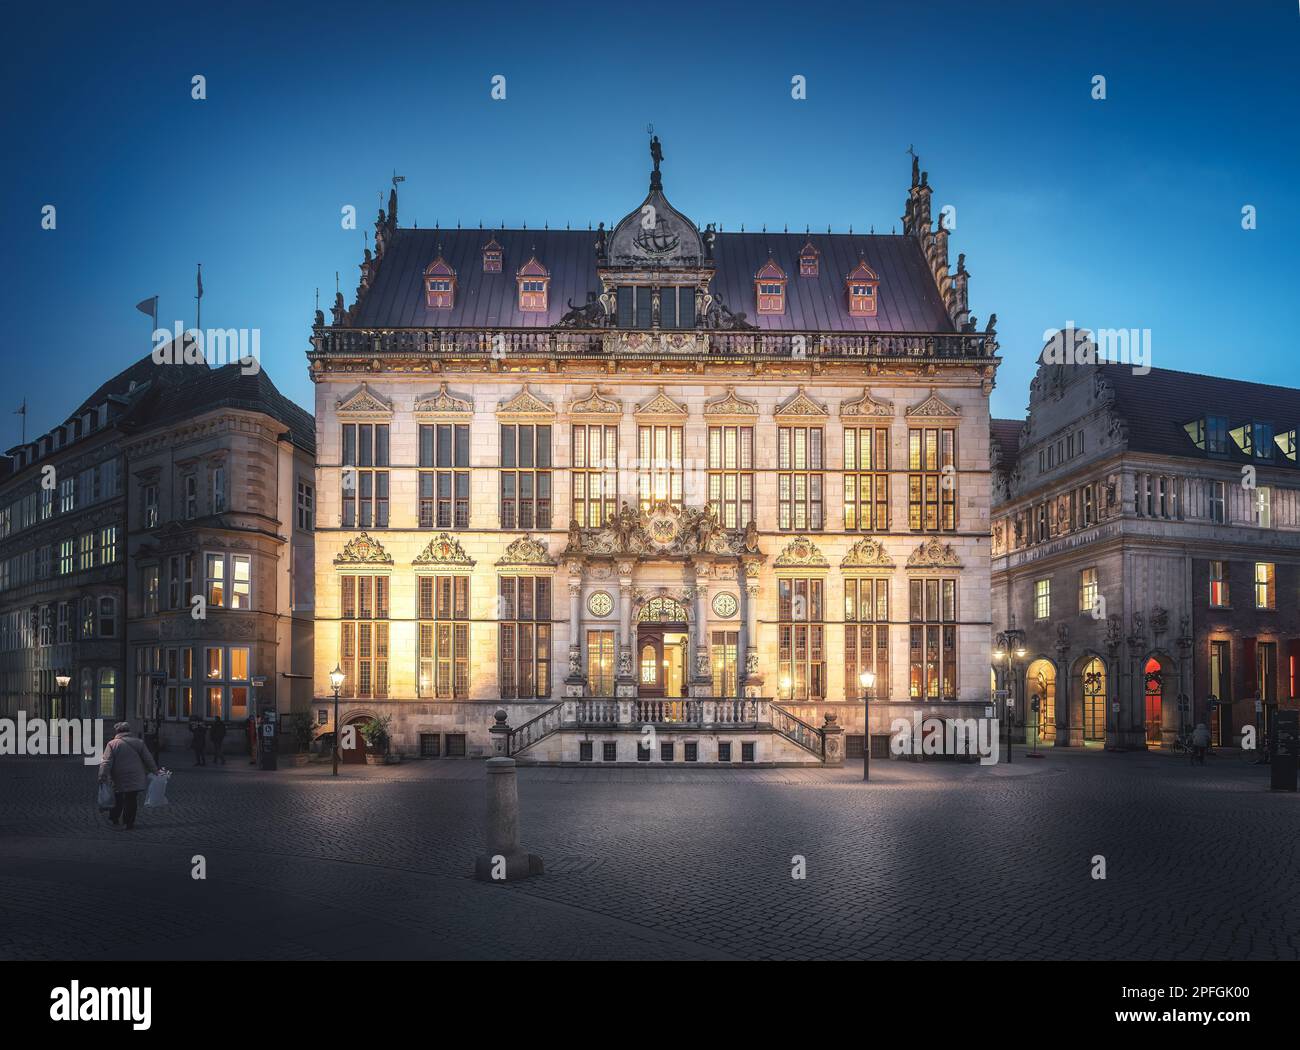 Schutting Building at night - Bremen Chamber of Commerce - Bremen, Germany Stock Photo